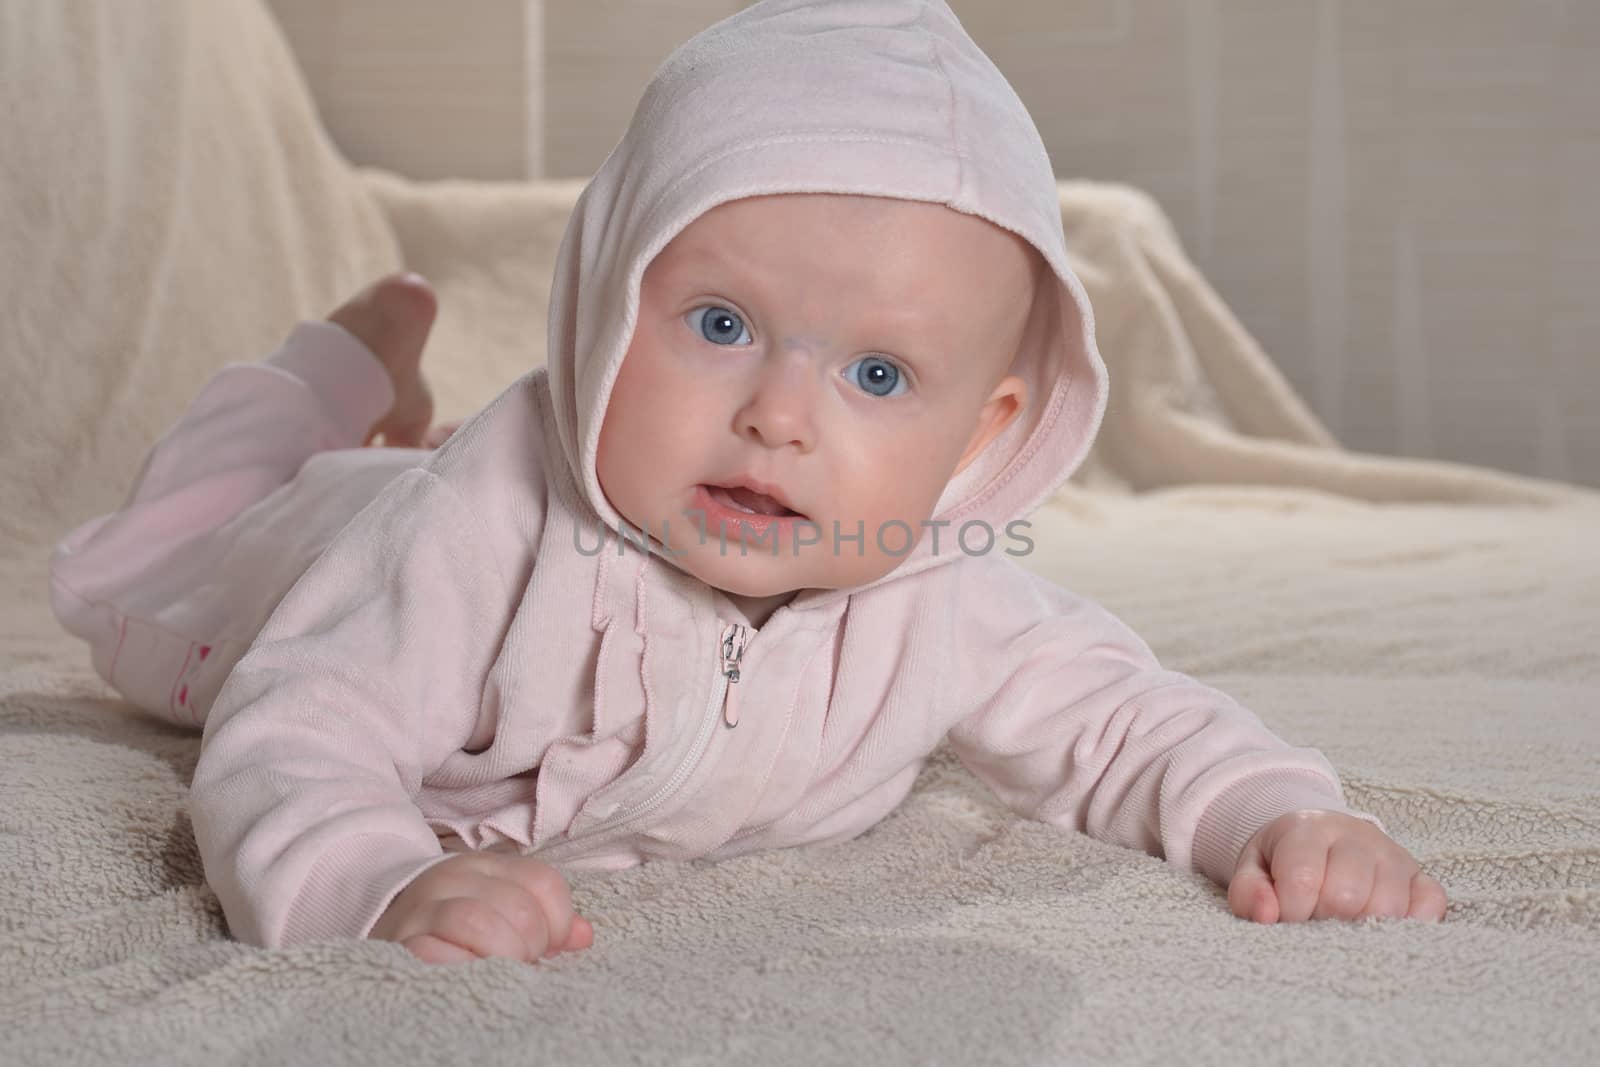 newborn girl wearing pink bathrobe and lying in her bed looking 